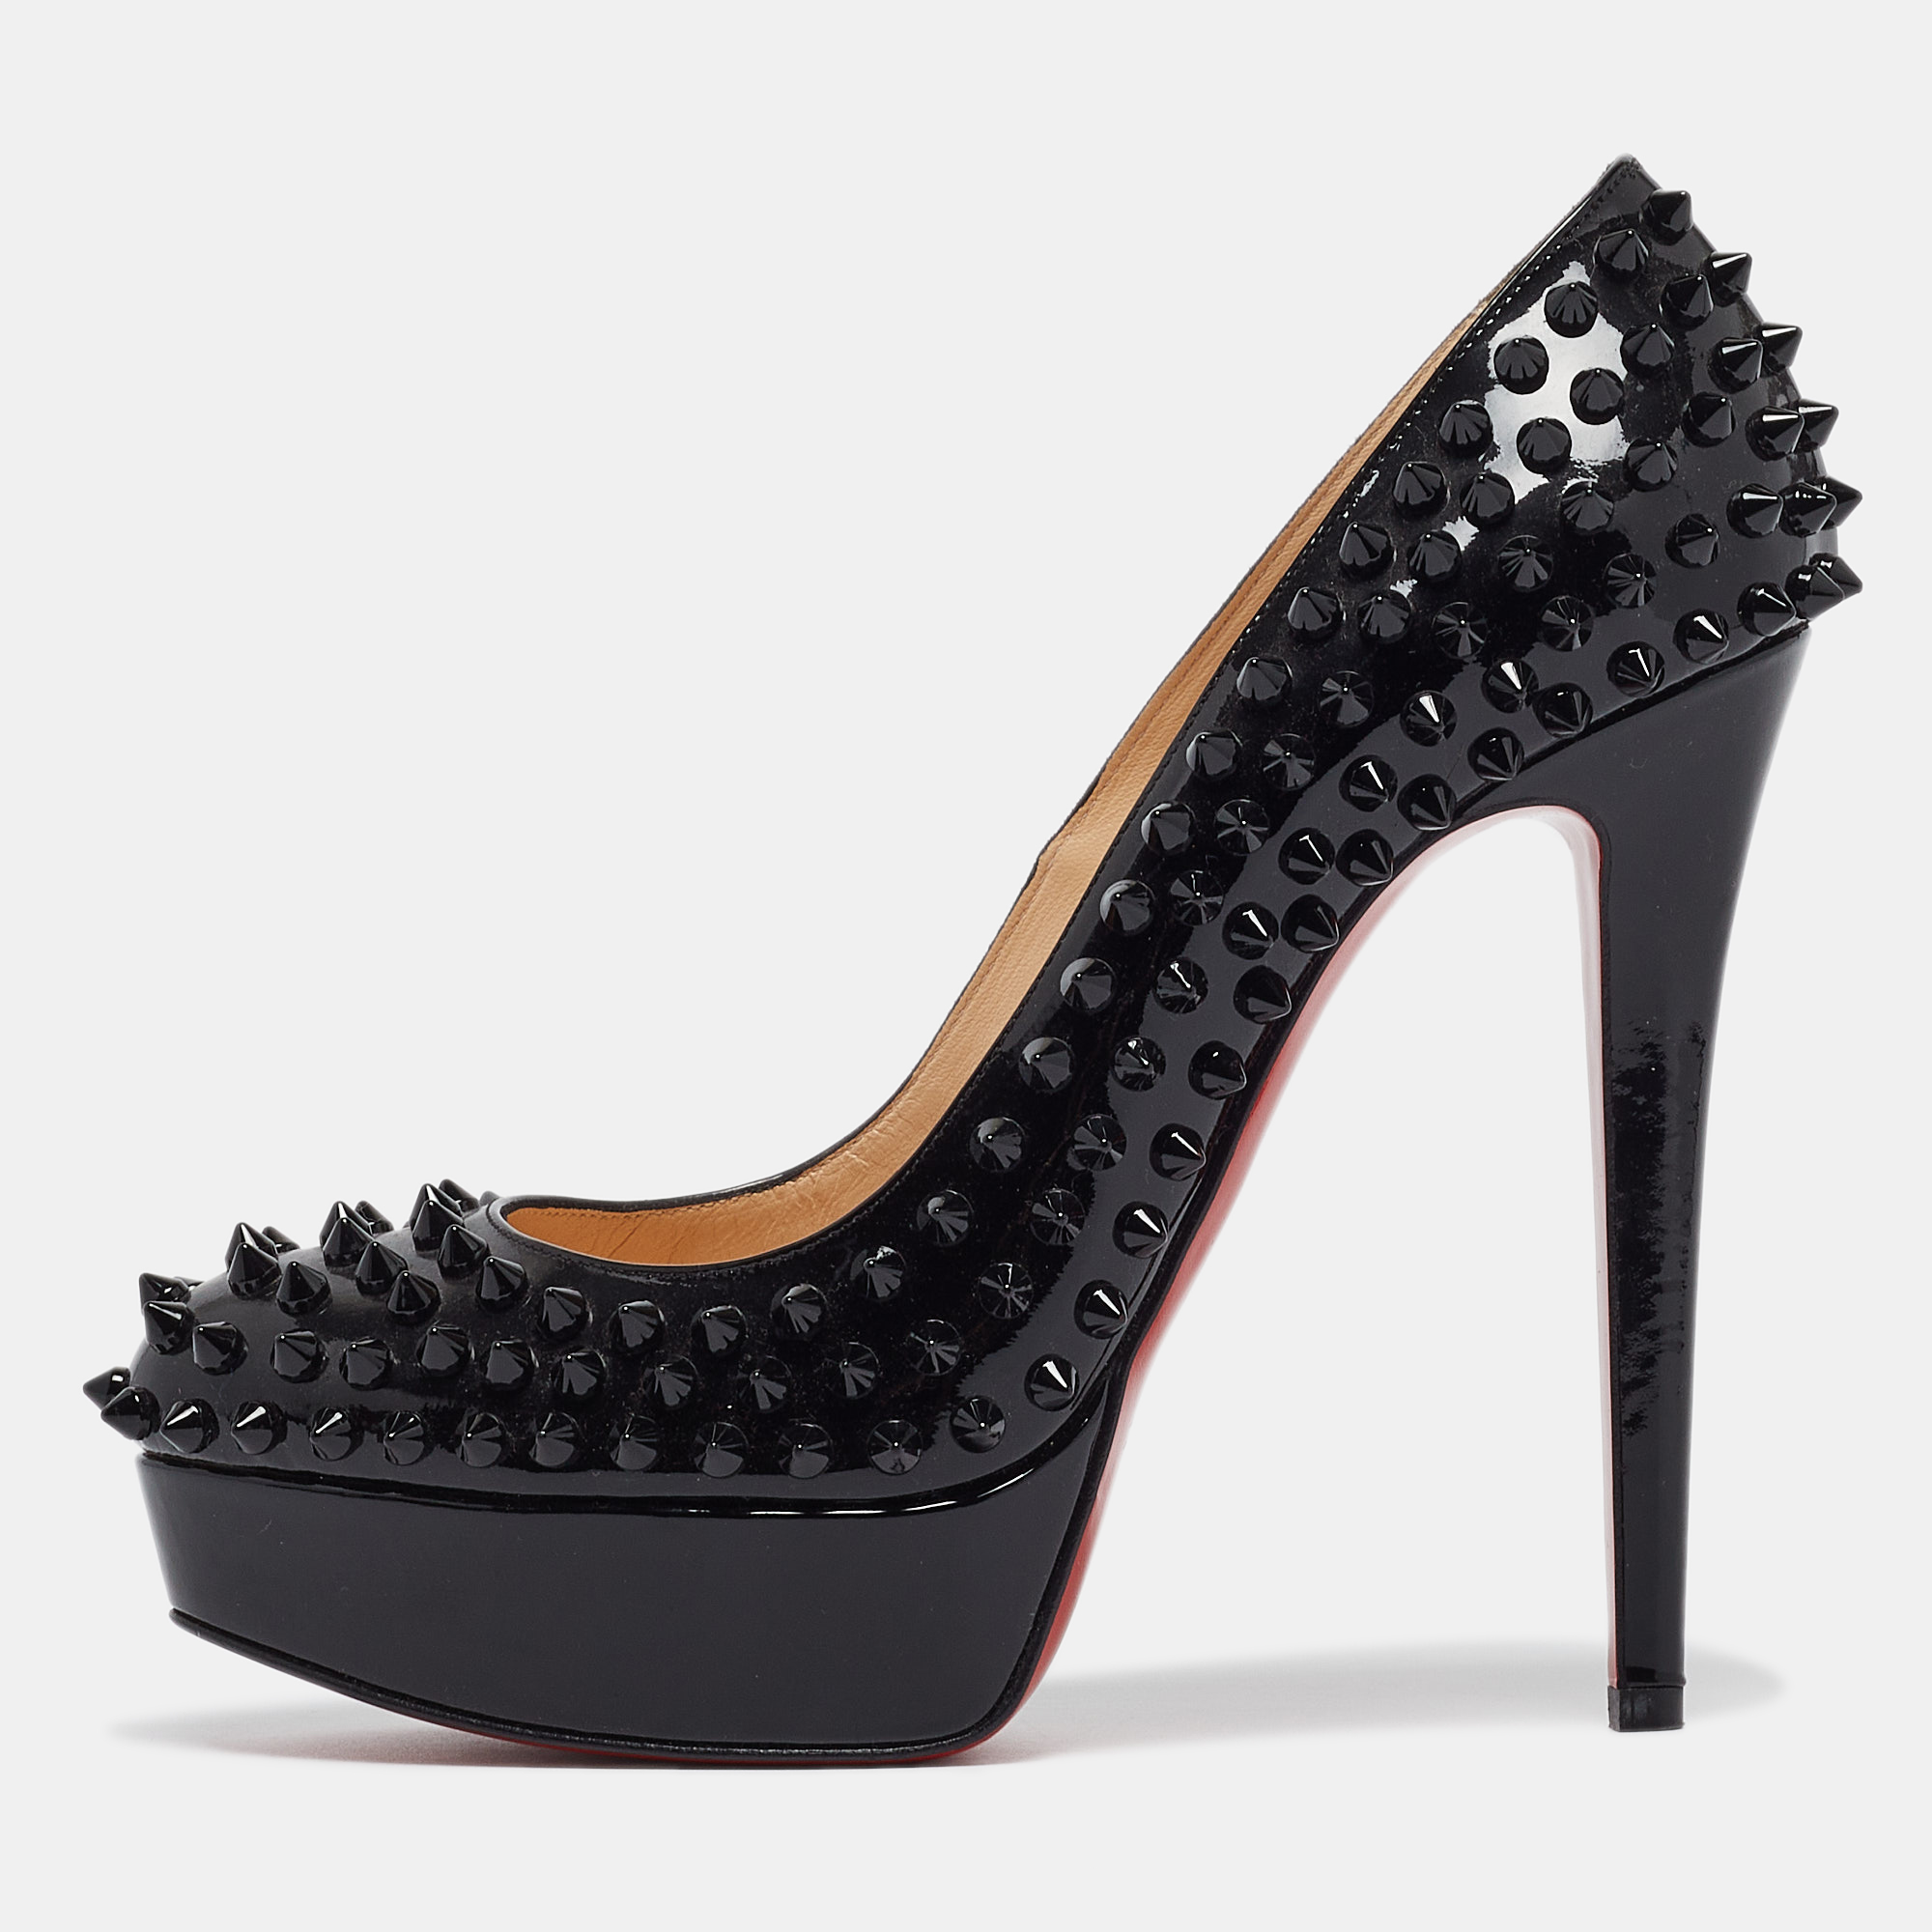 Christian louboutin black patent leather bianca spikes pumps size 38.5